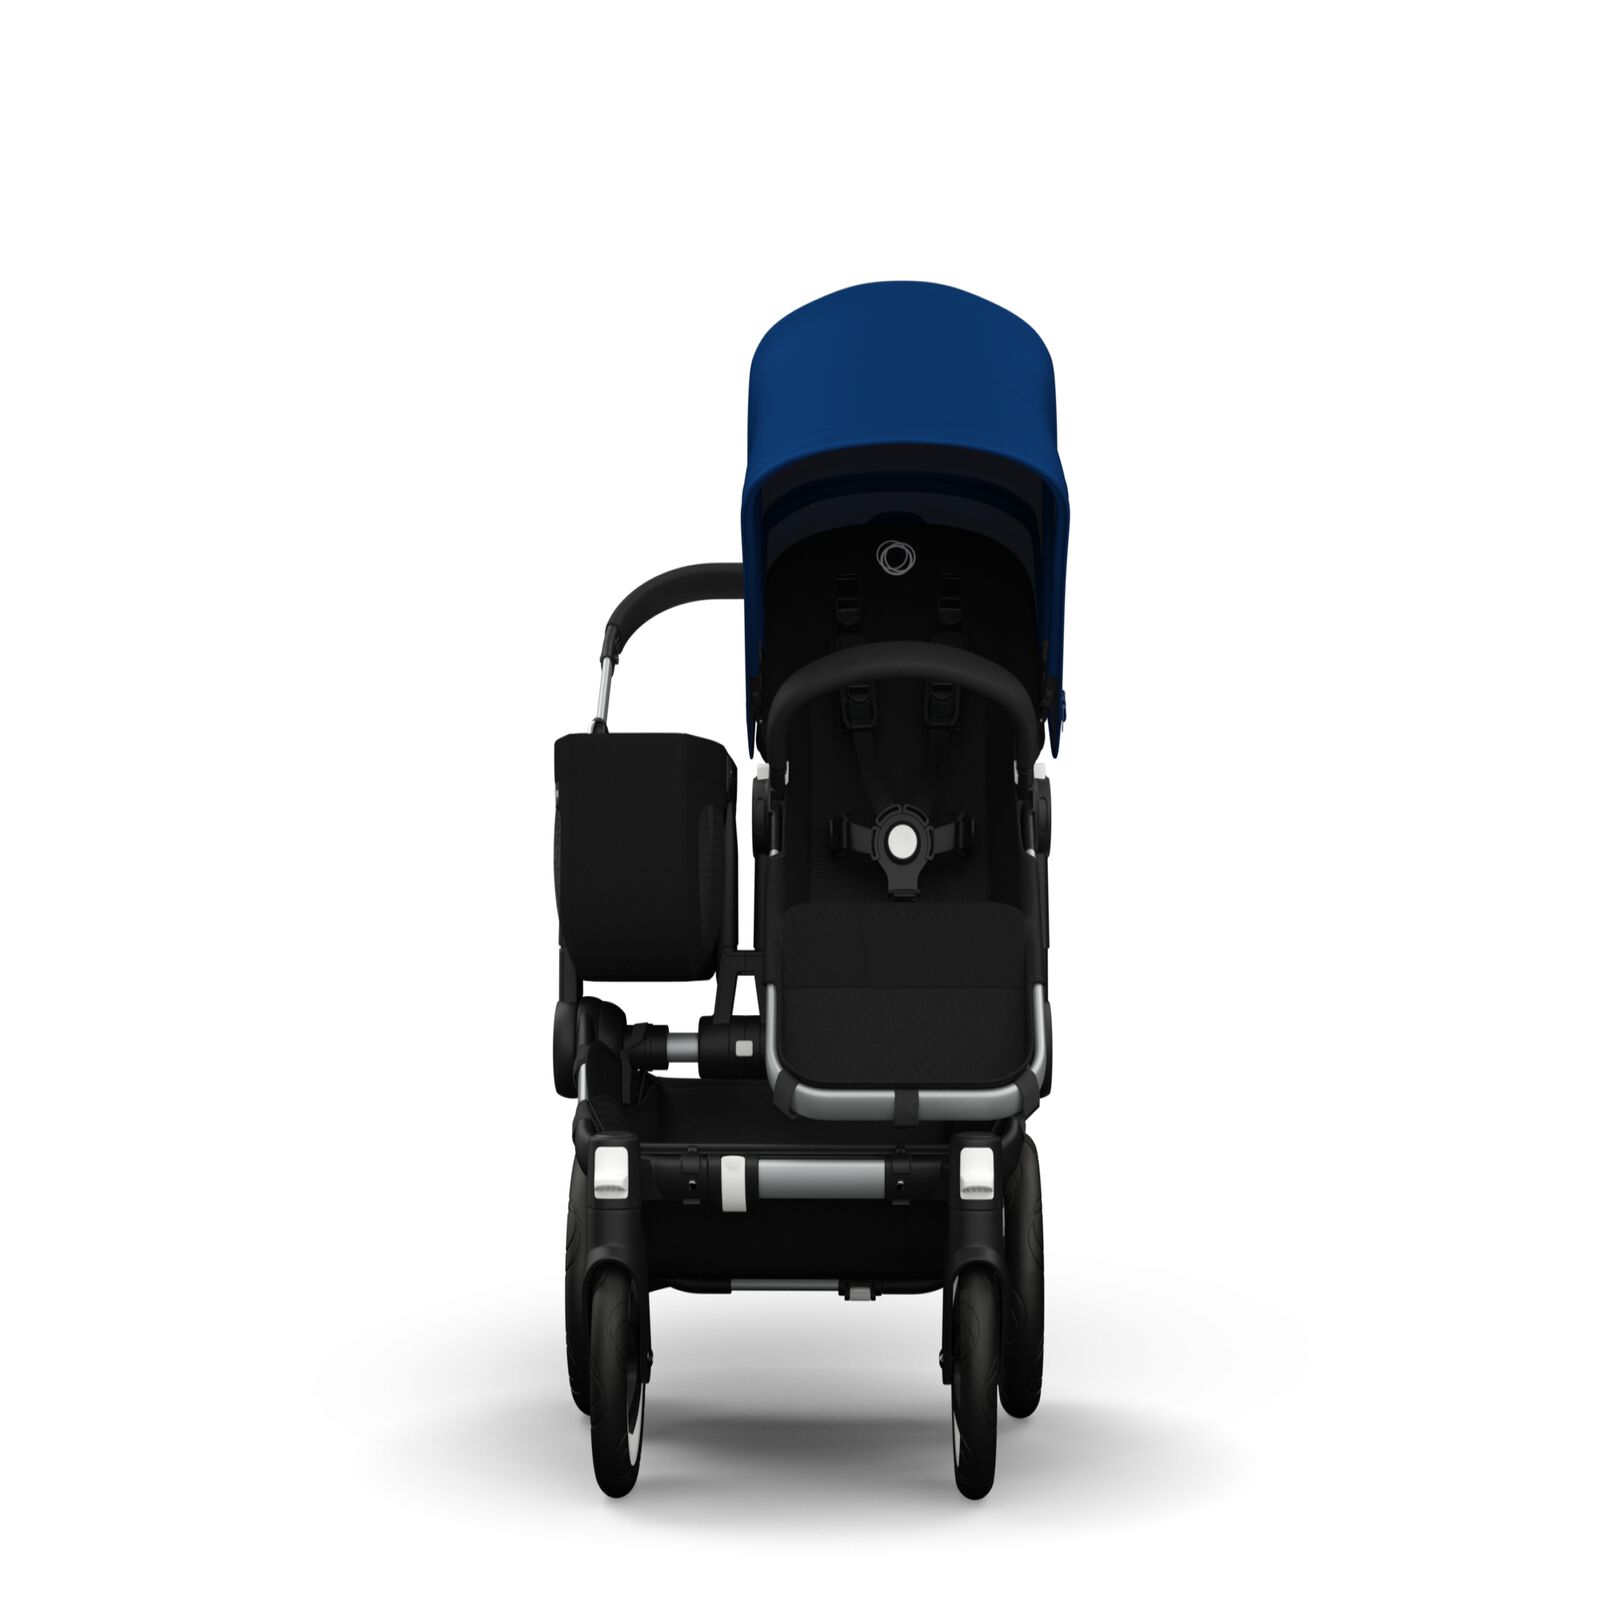 Bugaboo Donkey sun canopy (non-extendable) - View 8